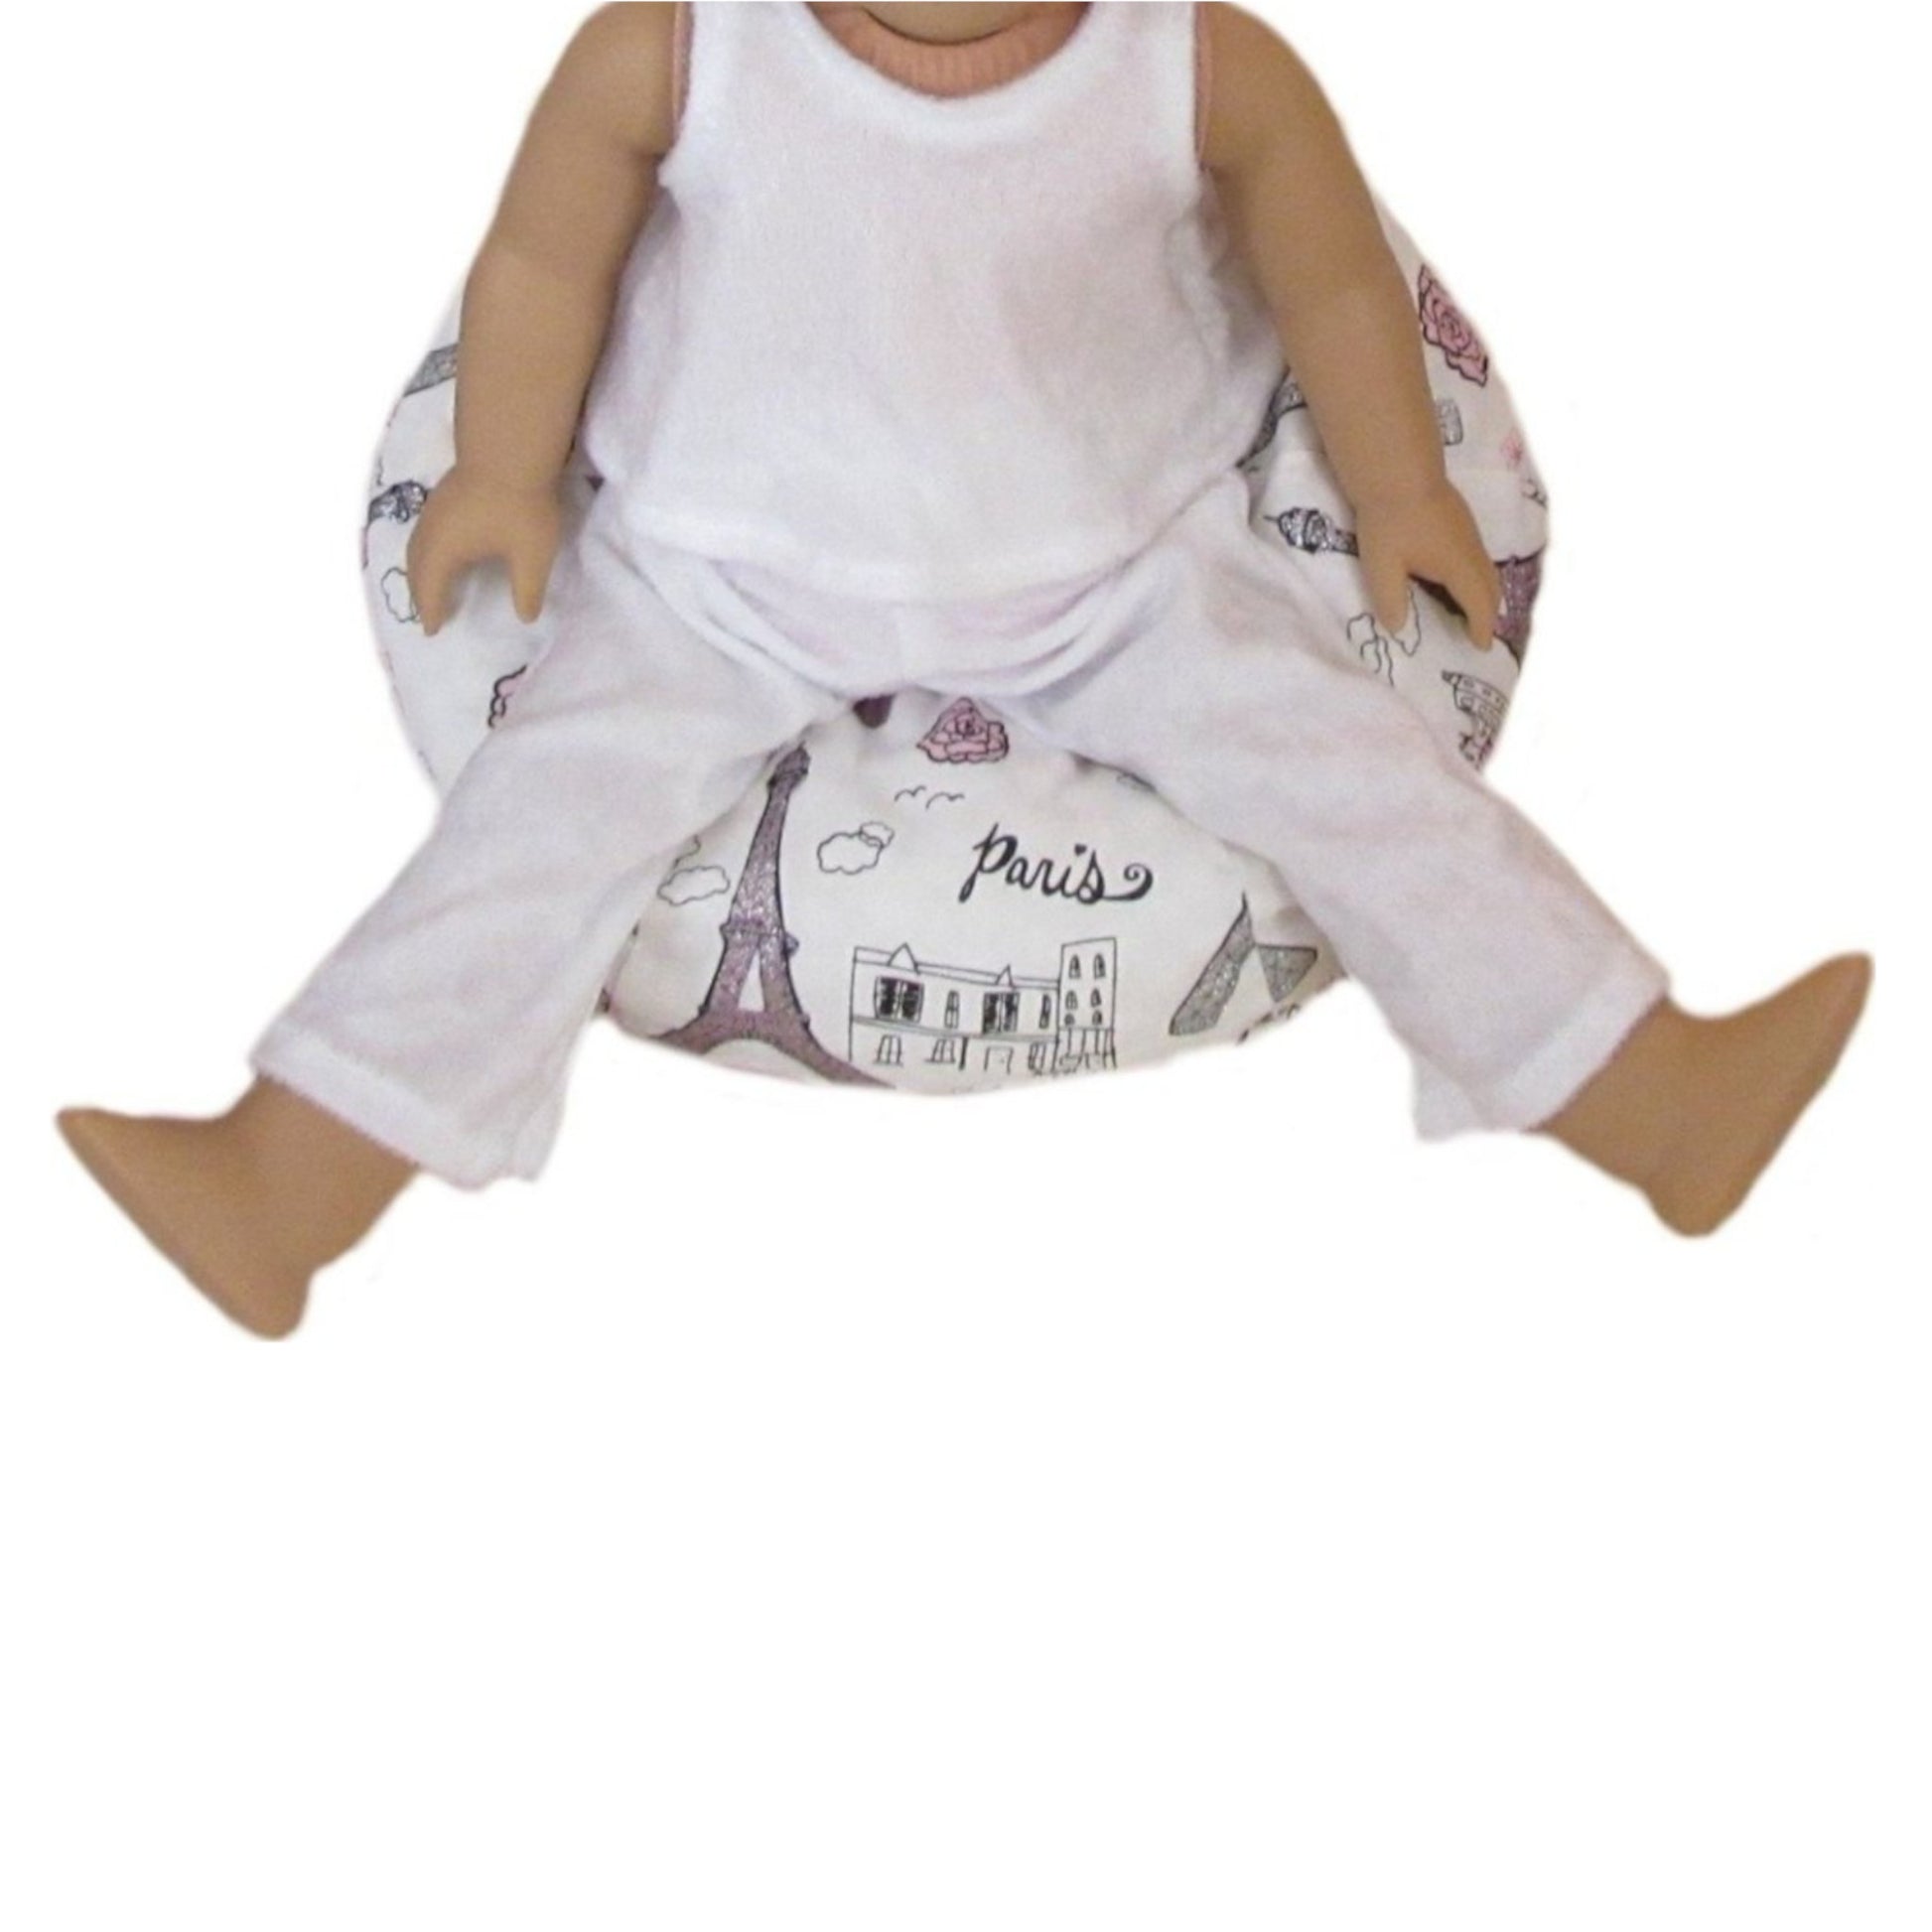 Paris Doll Bean Bag Chair for 18-inch dolls with doll